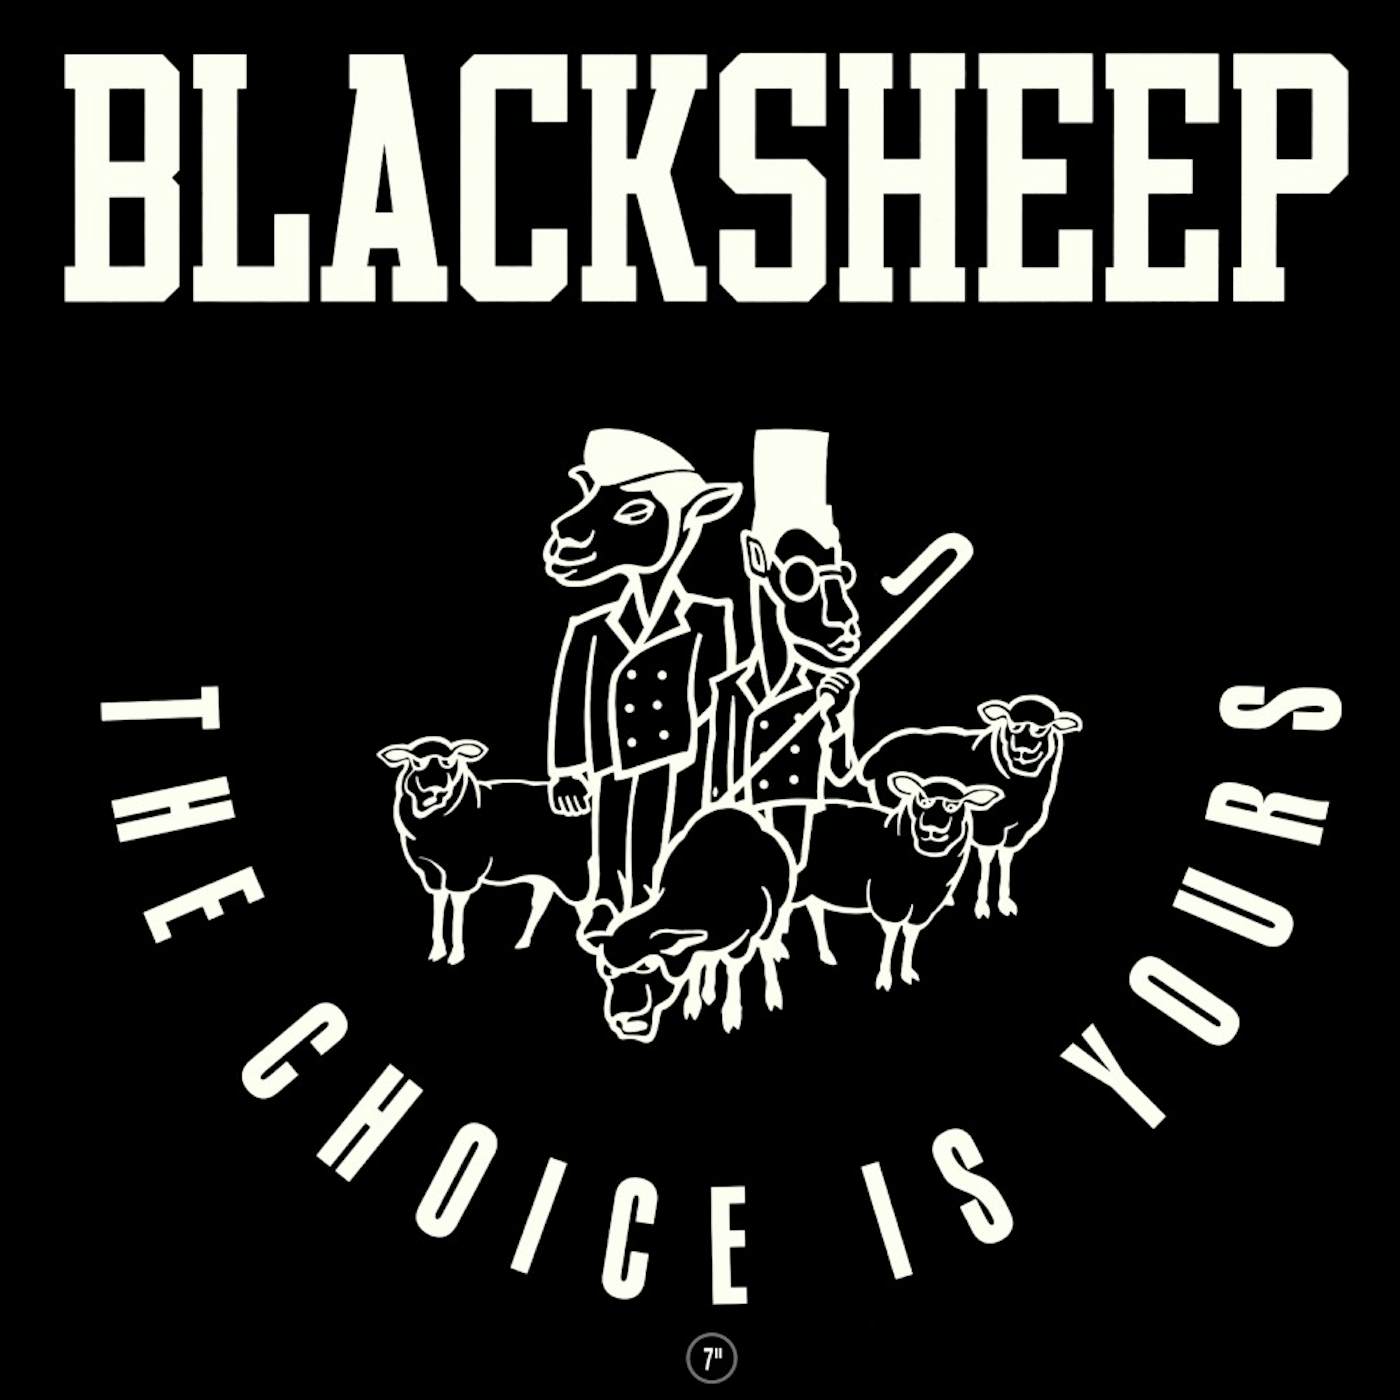 Black Sheep Choice Is Yours Vinyl Record